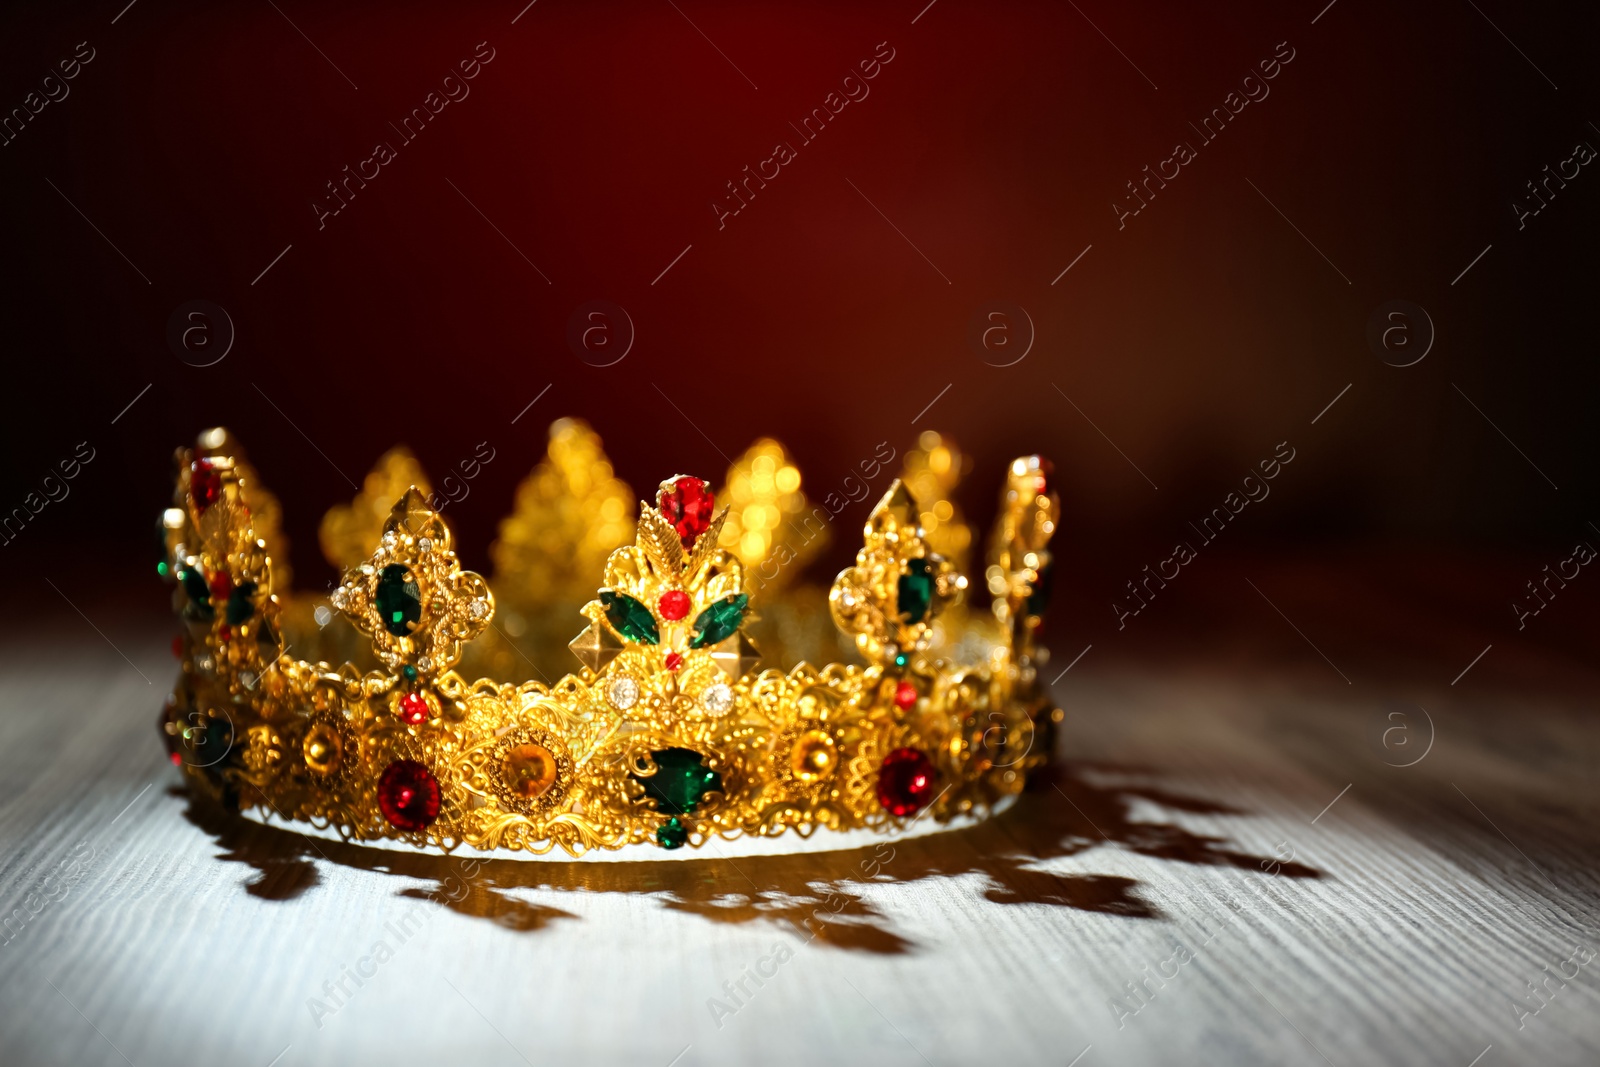 Photo of Beautiful golden crown with gems on wooden table. Fantasy item